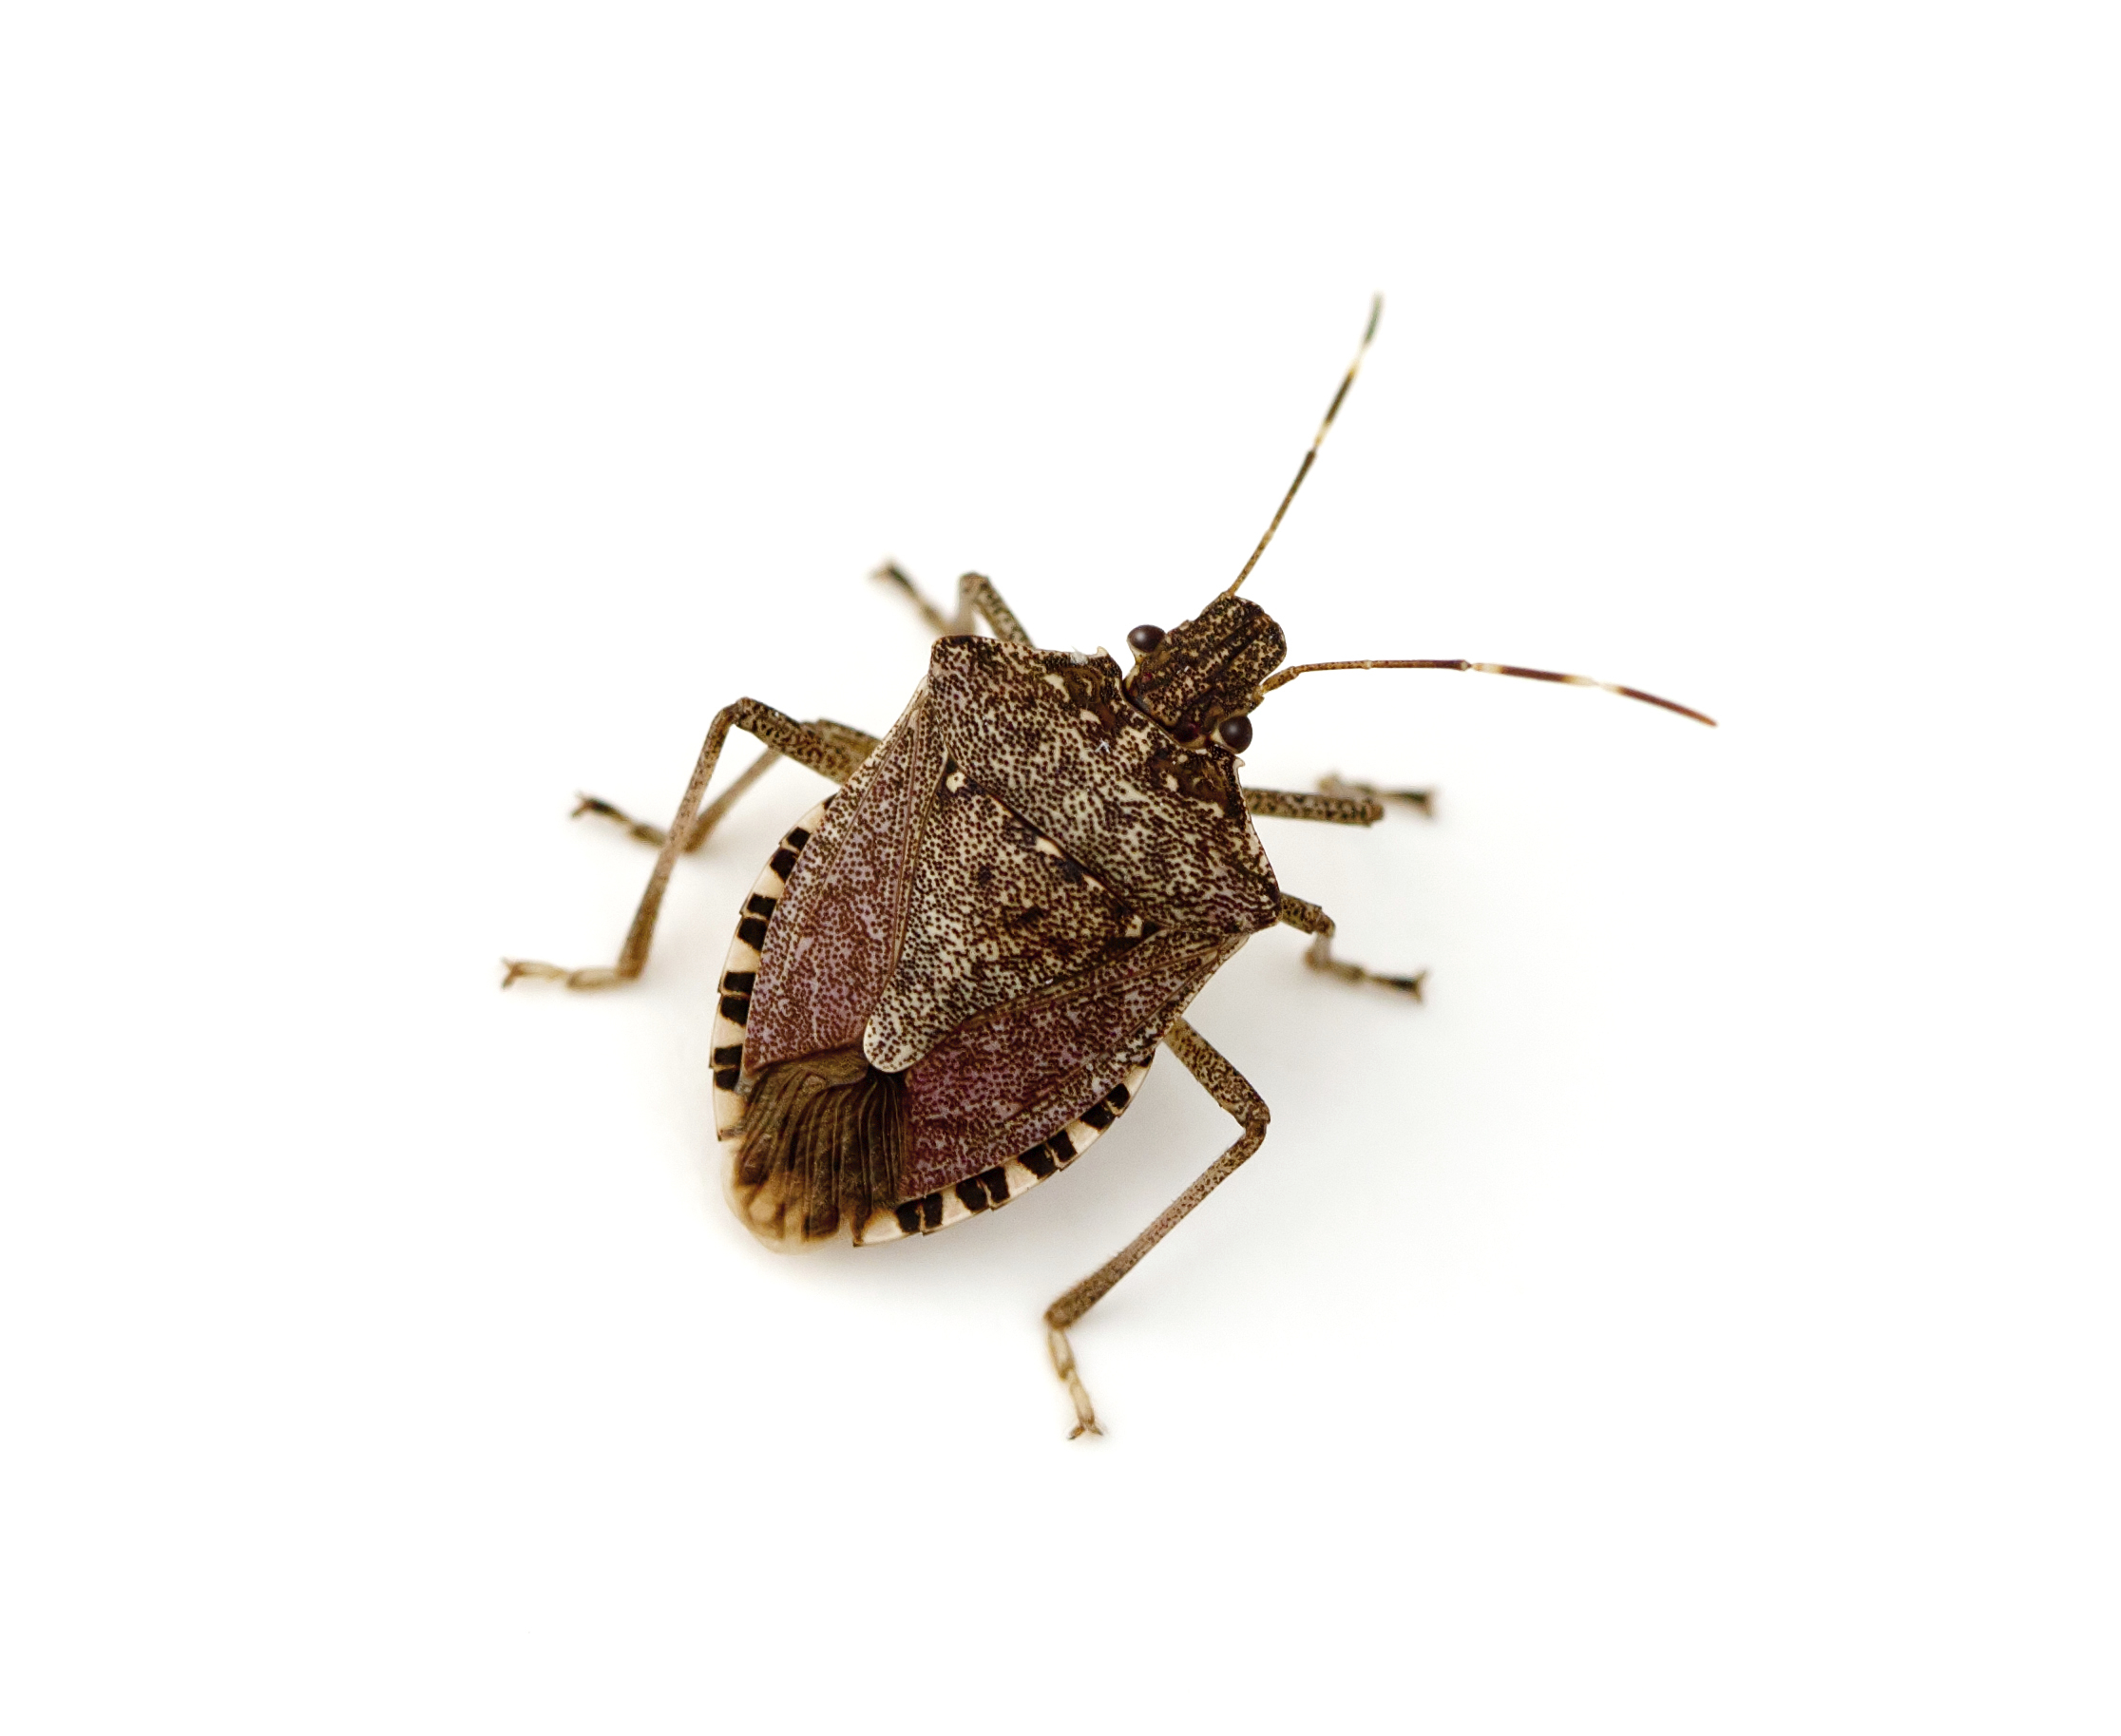 Occasional Invaders- Stink bugs